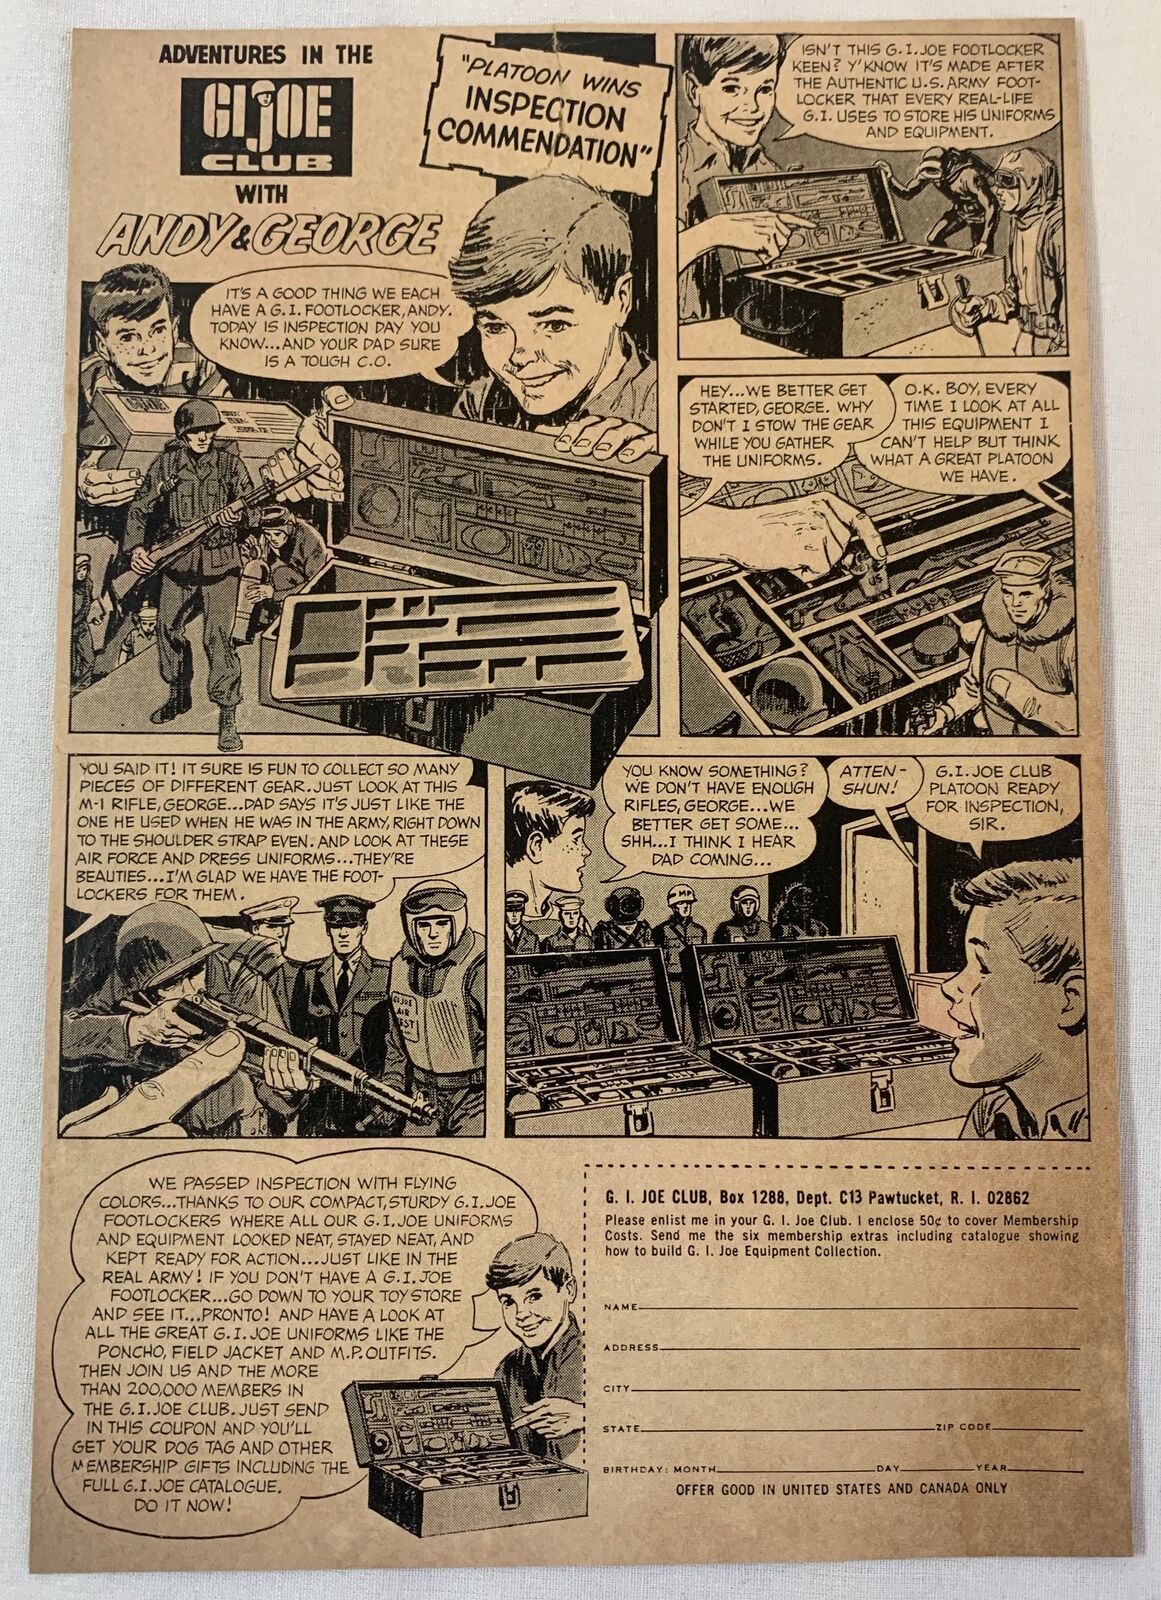 1966 GI JOE ad page ~ ANDY & GEORGE ~ Platoon Wins Inspection Commendation